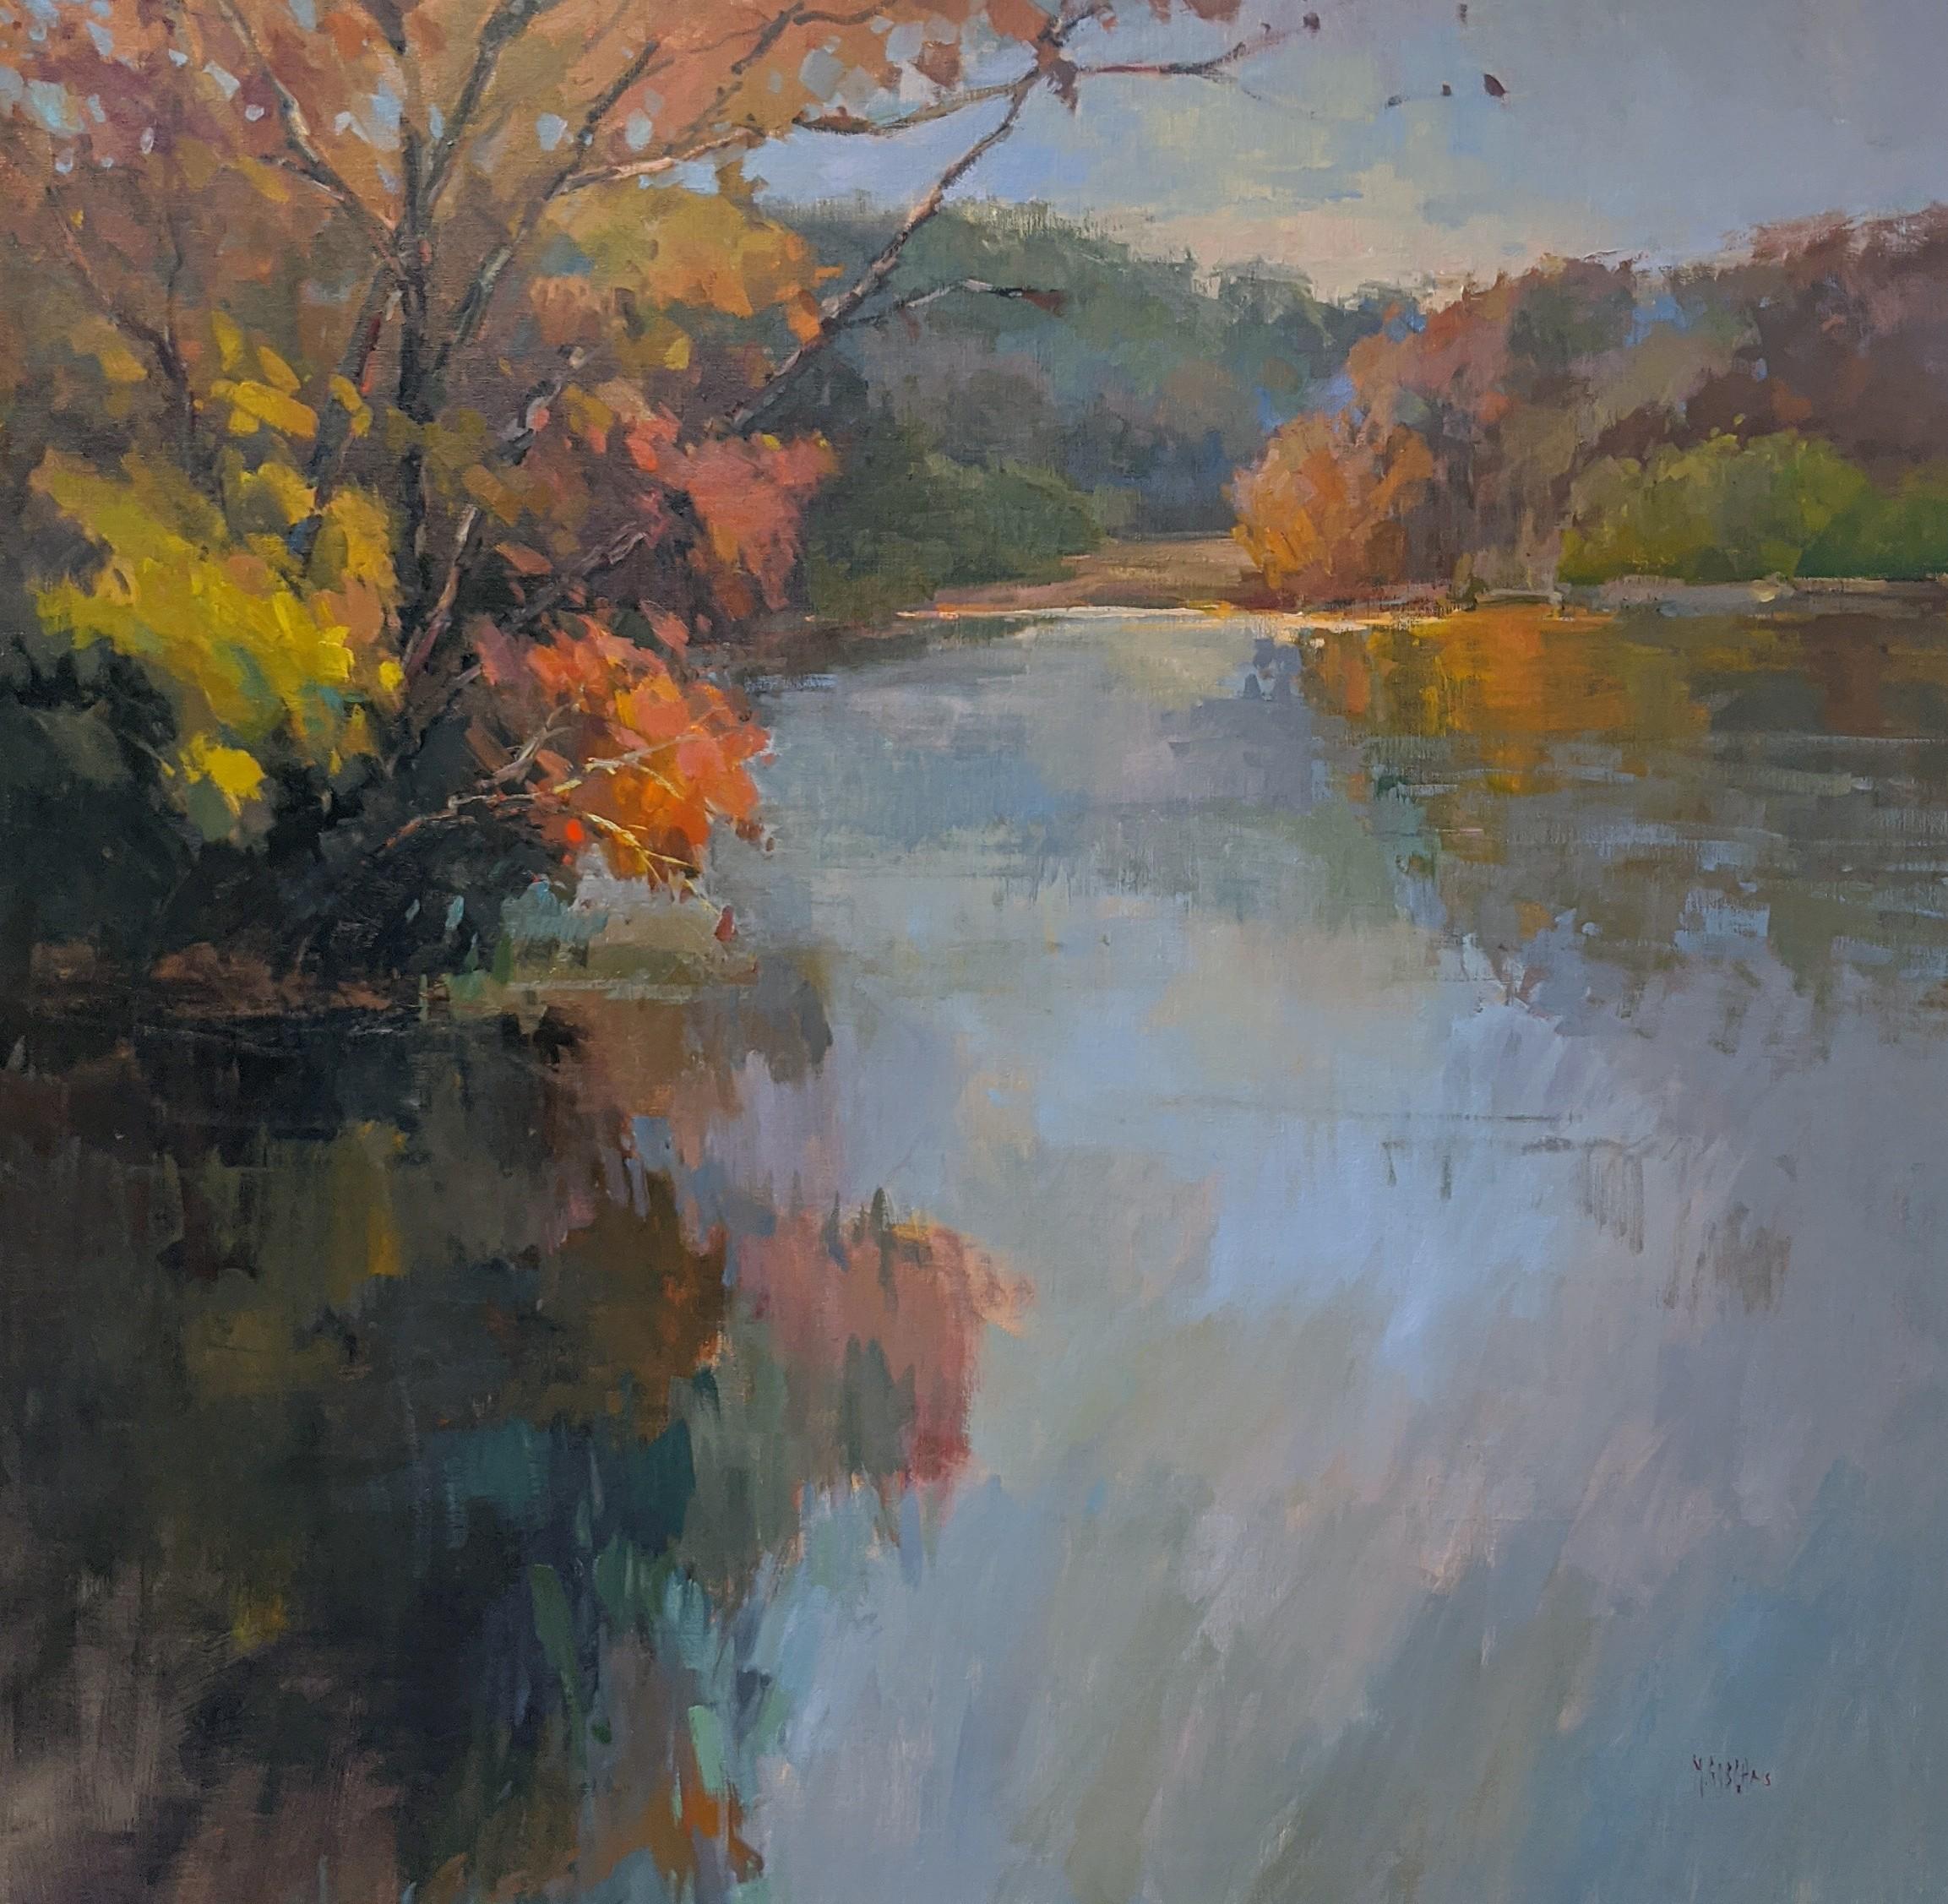 'Chattahoochee view' is a large framed Impressionist oil on canvas plein-air landscape painting of square format created by American artist Millie Gosch in 2020. Featuring a palette mostly made of orange, blue, and purple tones, the painting depicts